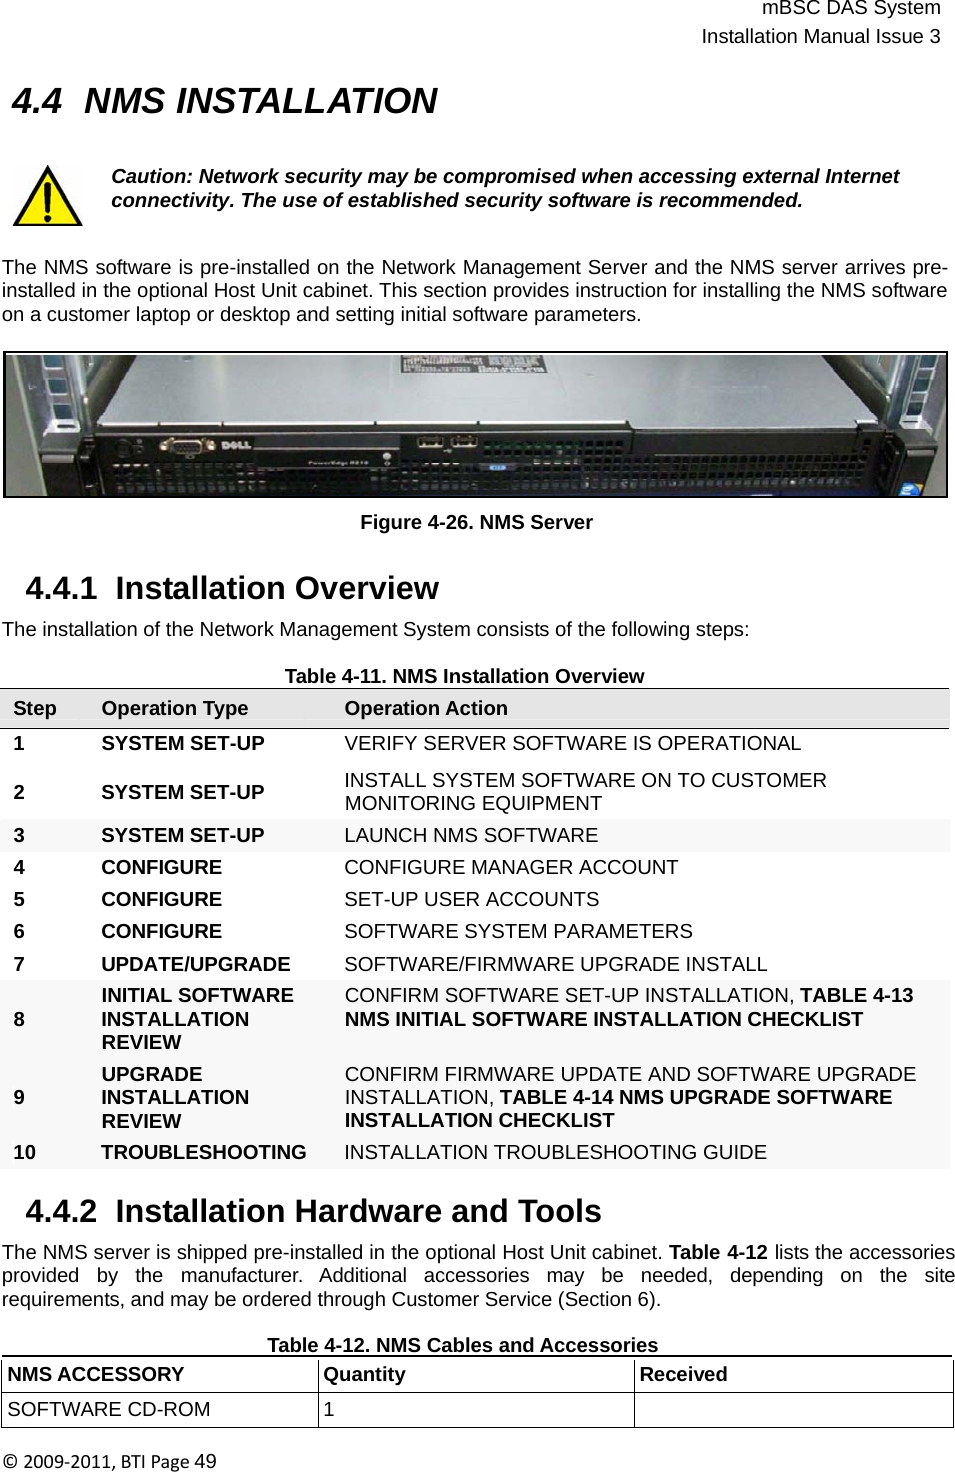 mBSC DAS SystemInstallation Manual Issue 3©2009‐2011,BTIPage49    4.4 NMS INSTALLATION   Caution: Network security may be compromised when accessing external Internet connectivity. The use of established security software is recommended.   The NMS software is pre-installed on the Network Management Server and the NMS server arrives pre- installed in the optional Host Unit cabinet. This section provides instruction for installing the NMS software on a customer laptop or desktop and setting initial software parameters.          Figure 4-26. NMS Server   4.4.1  Installation Overview  The installation of the Network Management System consists of the following steps:  Table 4-11. NMS Installation Overview Step Operation Type Operation Action 1 SYSTEM SET-UP VERIFY SERVER SOFTWARE IS OPERATIONAL  2 SYSTEM SET-UP  INSTALL SYSTEM SOFTWARE ON TO CUSTOMER MONITORING EQUIPMENT  3 SYSTEM SET-UP  LAUNCH NMS SOFTWARE 4 CONFIGURE  CONFIGURE MANAGER ACCOUNT 5 CONFIGURE  SET-UP USER ACCOUNTS 6 CONFIGURE  SOFTWARE SYSTEM PARAMETERS 7 UPDATE/UPGRADE SOFTWARE/FIRMWARE UPGRADE INSTALL INITIAL SOFTWARE 8 INSTALLATION REVIEW UPGRADE 9 INSTALLATION REVIEW CONFIRM SOFTWARE SET-UP INSTALLATION, TABLE 4-13 NMS INITIAL SOFTWARE INSTALLATION CHECKLIST   CONFIRM FIRMWARE UPDATE AND SOFTWARE UPGRADE INSTALLATION, TABLE 4-14 NMS UPGRADE SOFTWARE INSTALLATION CHECKLIST 10 TROUBLESHOOTING INSTALLATION TROUBLESHOOTING GUIDE  4.4.2  Installation Hardware and Tools  The NMS server is shipped pre-installed in the optional Host Unit cabinet. Table 4-12 lists the accessories provided   by   the   manufacturer.  Additional  accessories   may  be   needed,  depending  on   the  site requirements, and may be ordered through Customer Service (Section 6).     Table 4-12. NMS Cables and Accessories     NMS ACCESSORY Quantity Received SOFTWARE CD-ROM 1  